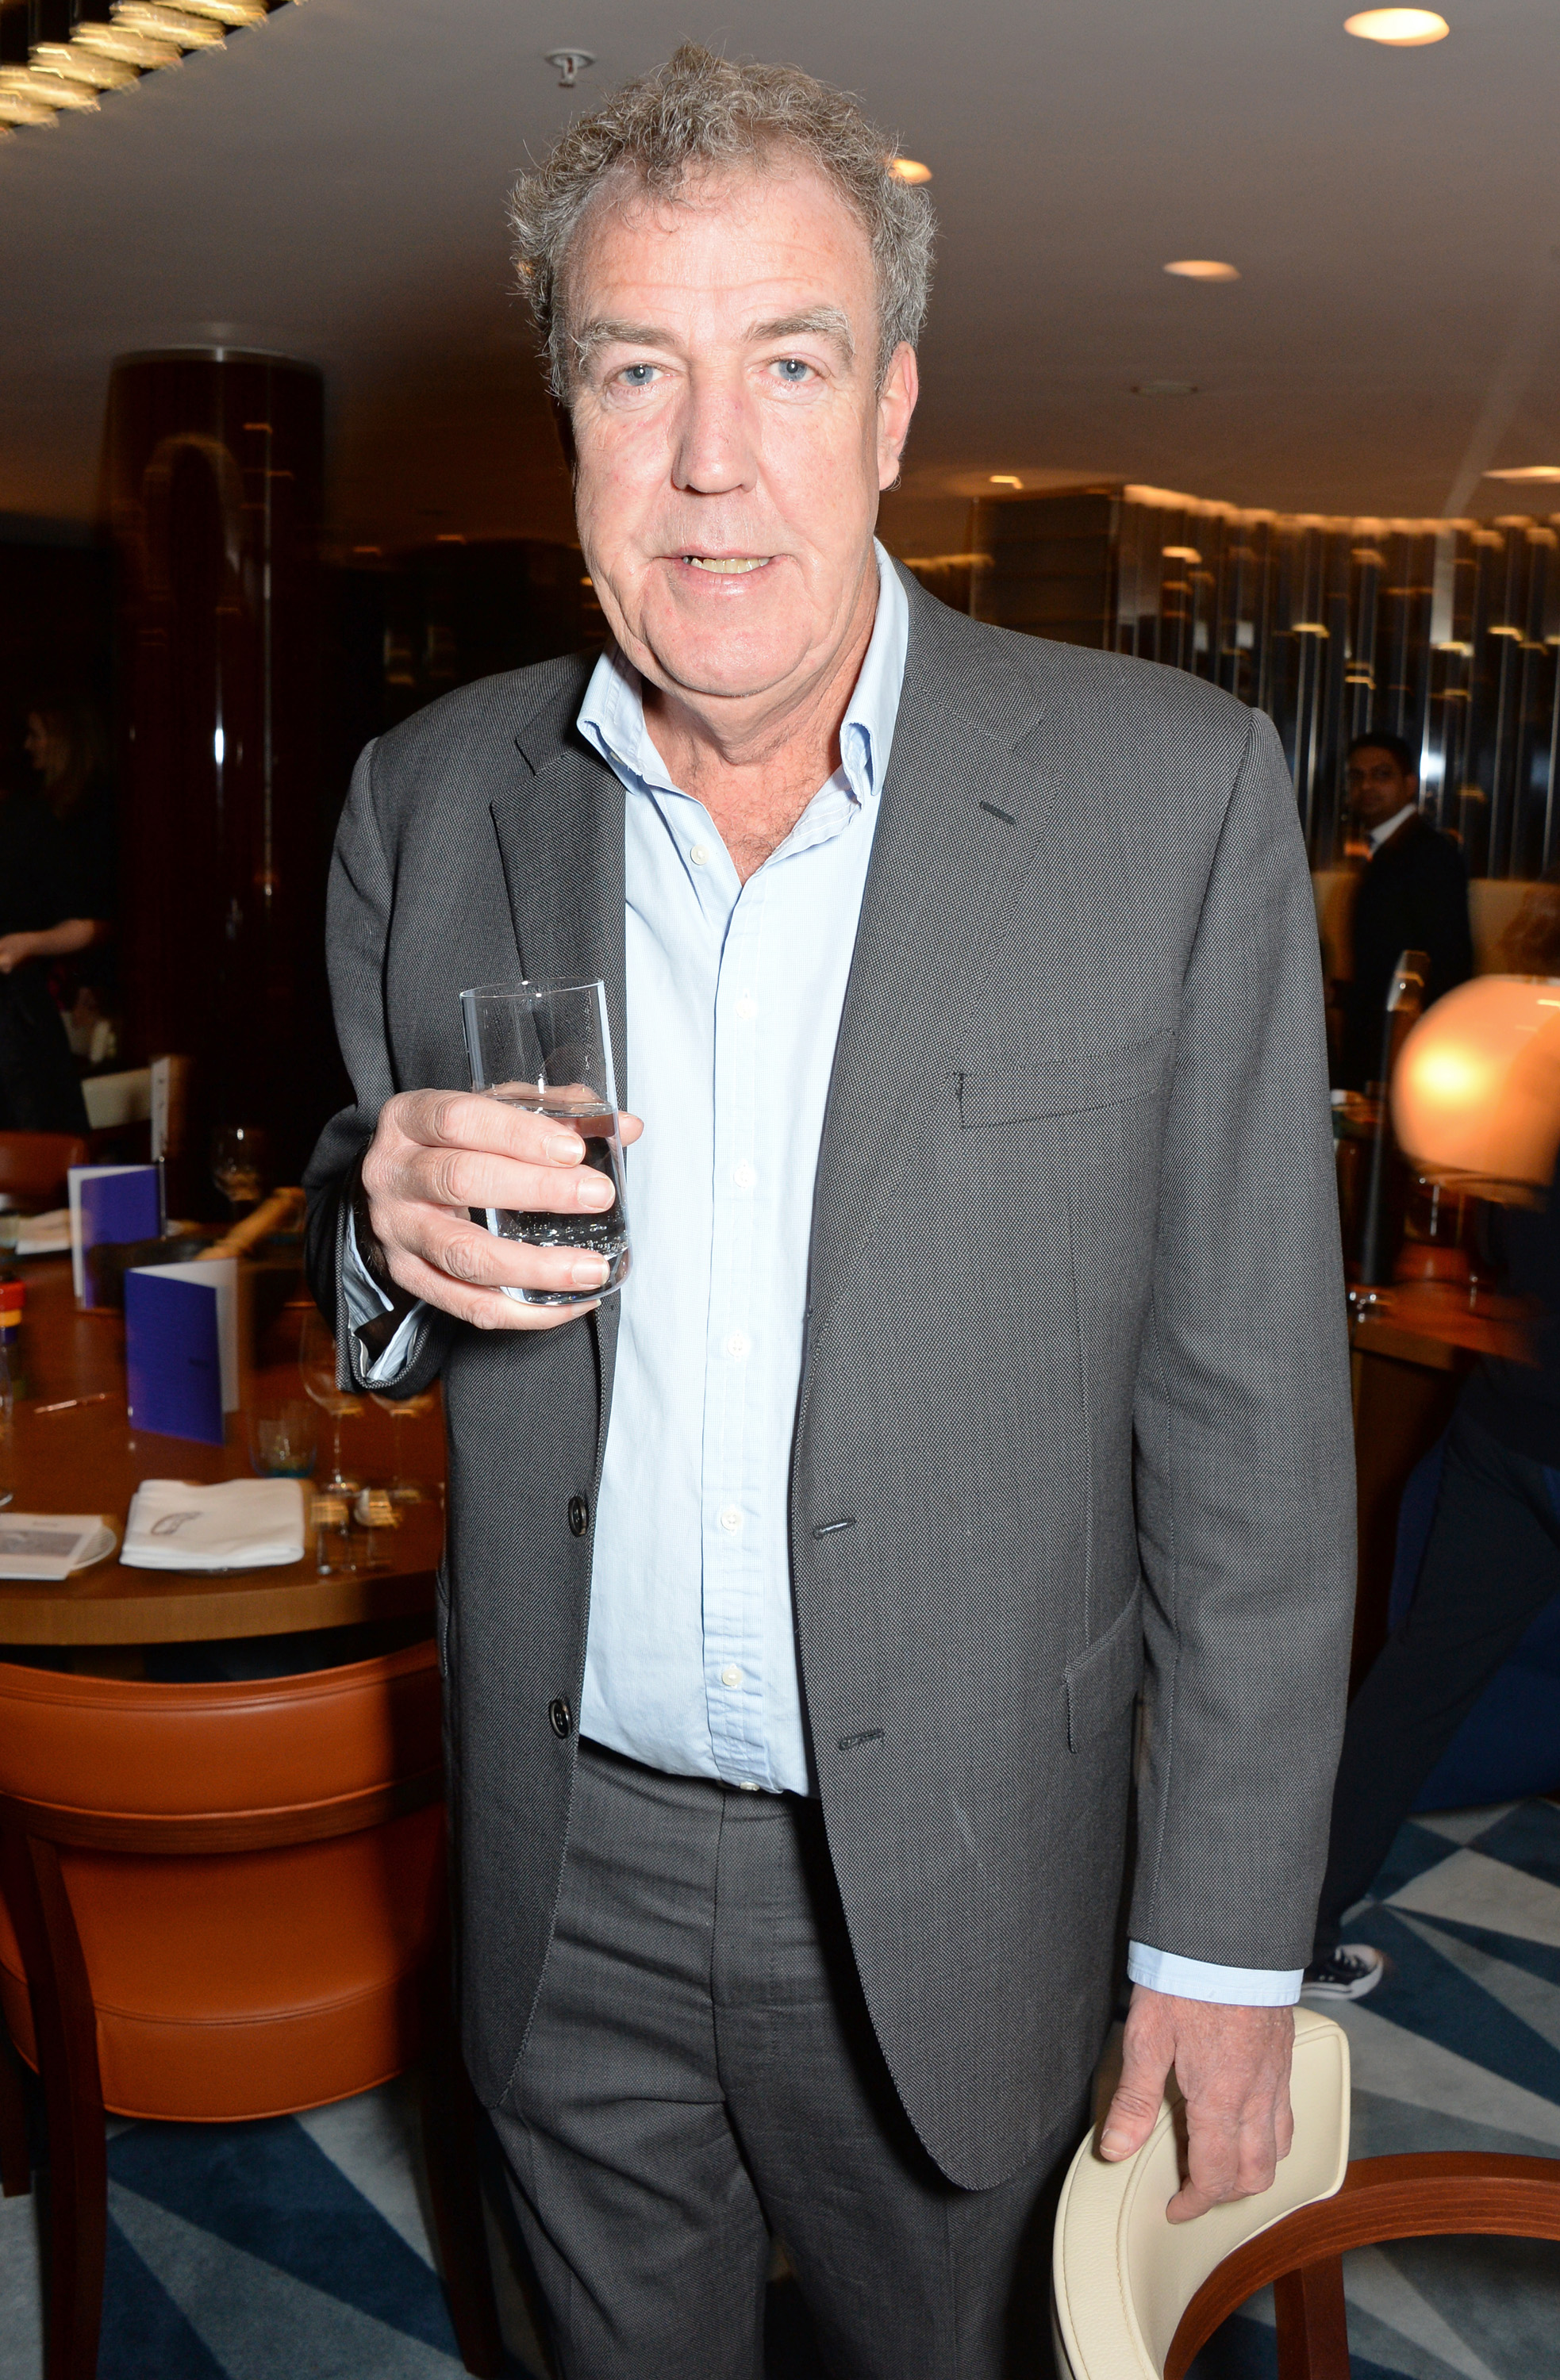 Jeremy Clarkson attends a charity dinner on February 3, 2015 in London, England. (David M. Benett—Getty Images)